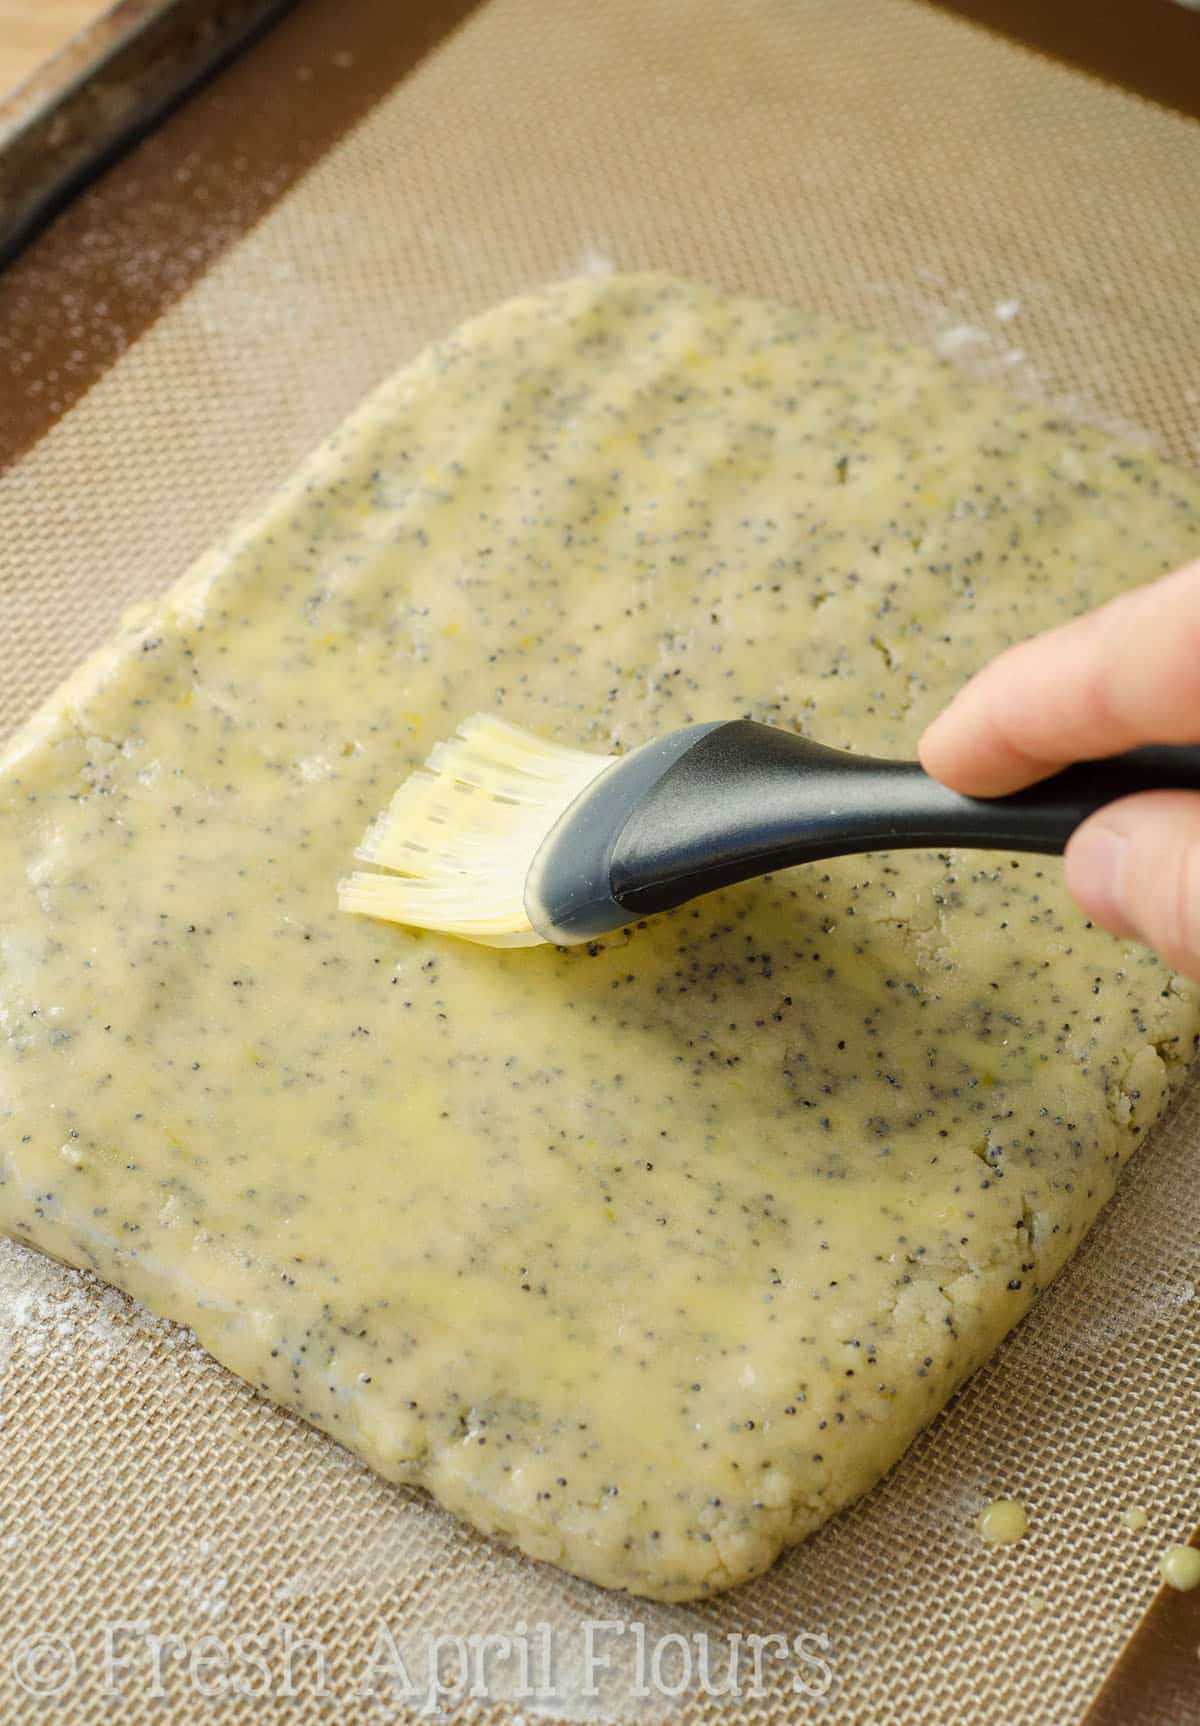 brushing lemon poppy seed biscotti dough with an egg wash